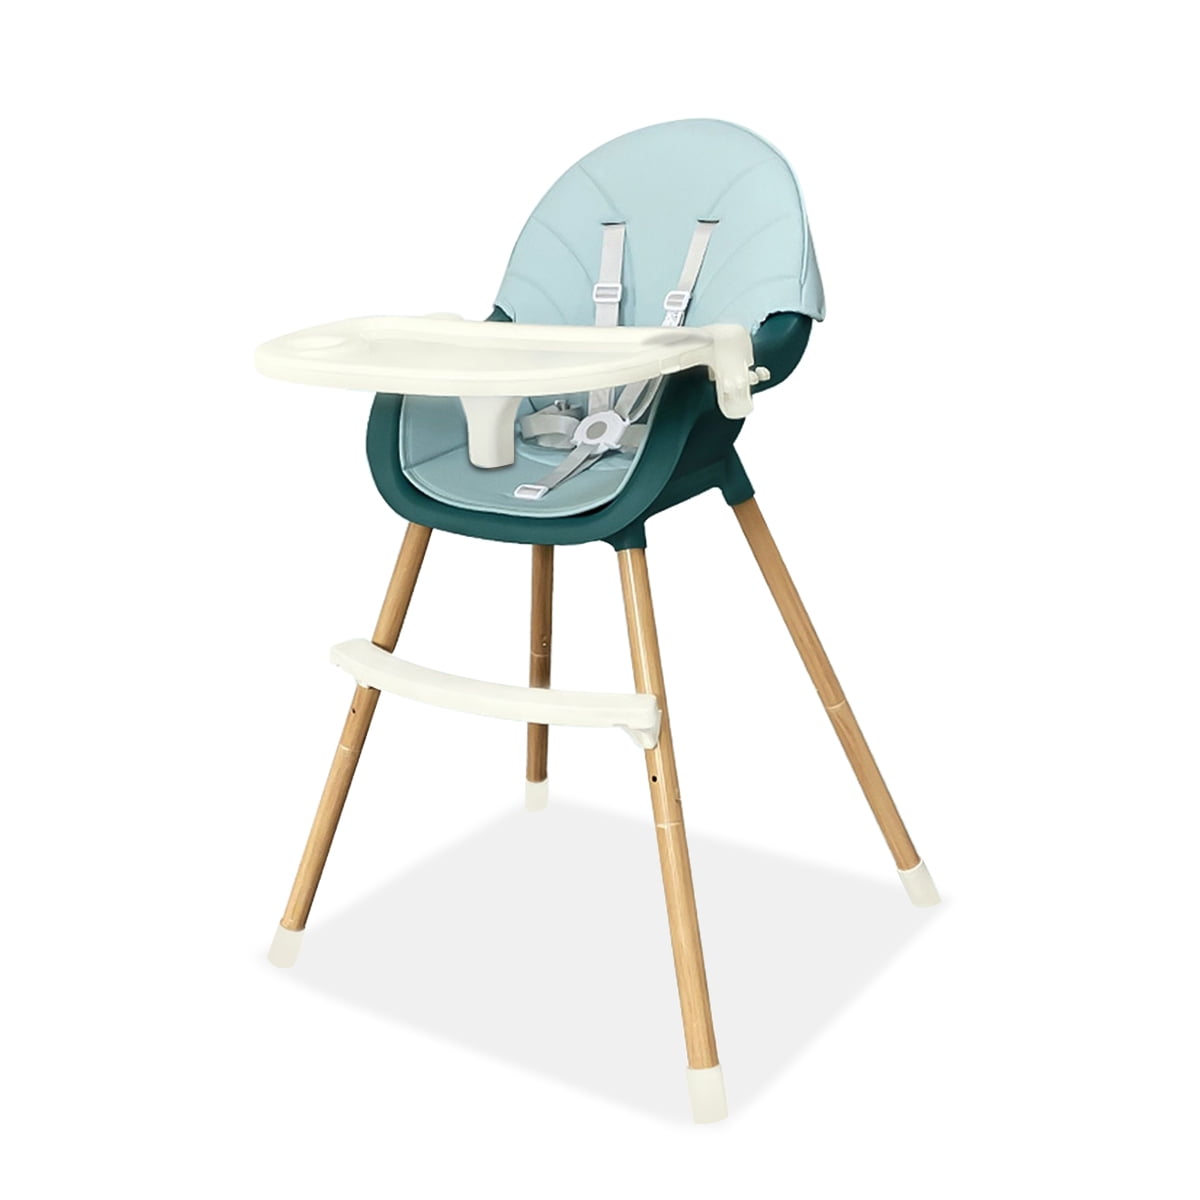 Wooden Highchair w/Double Removable Tray Adjustable Legs Kinder King 3 in 1 Convertible Baby High Chair Black Infant Feeding Chair-Toddler Chair 5-Point Harness Detachable Footrest & PU Cushion 